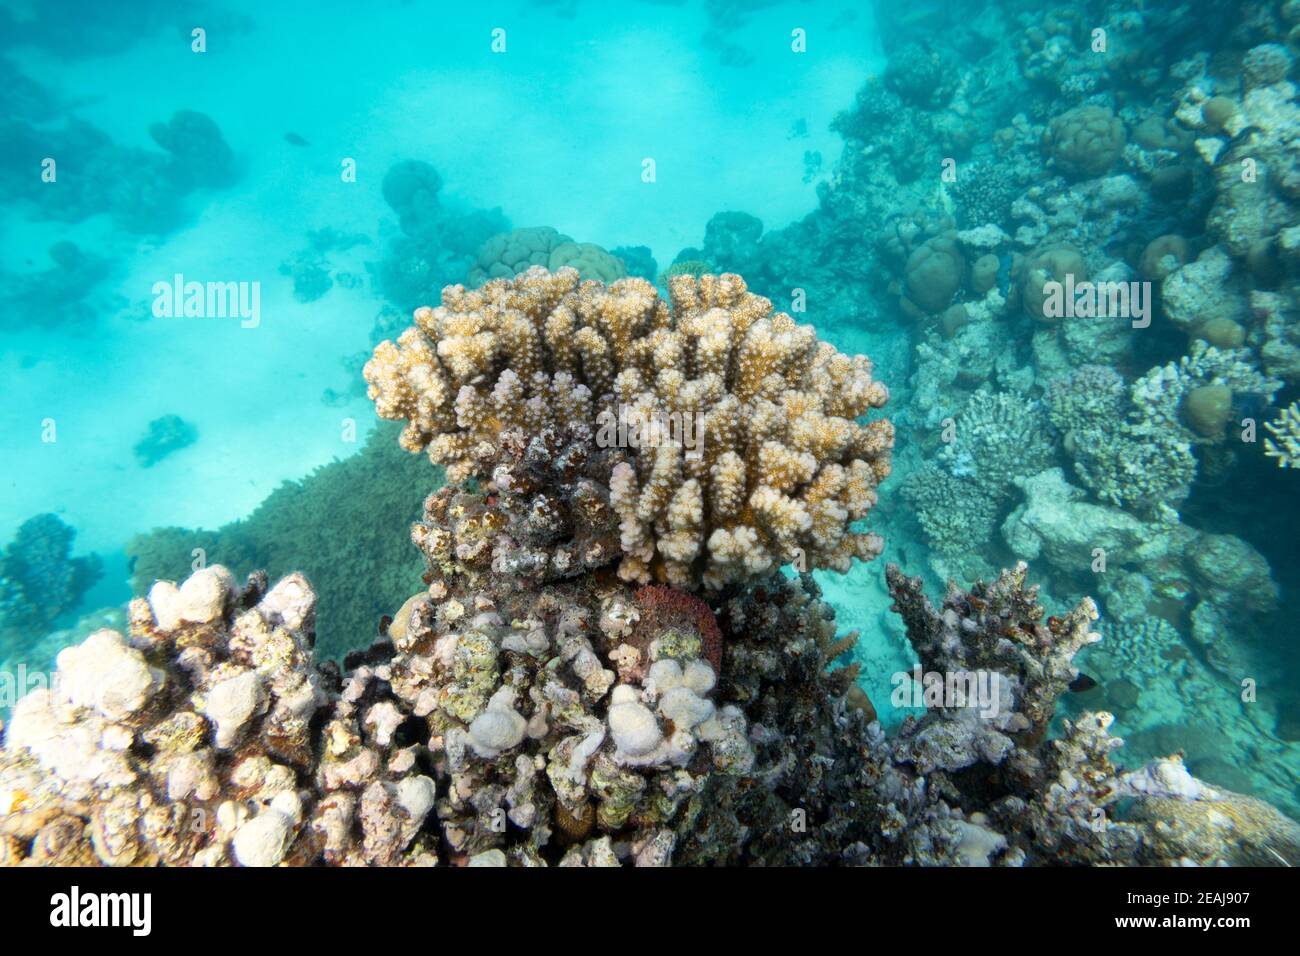 Colorful coral reef at the bottom of tropical sea, hard corals ...